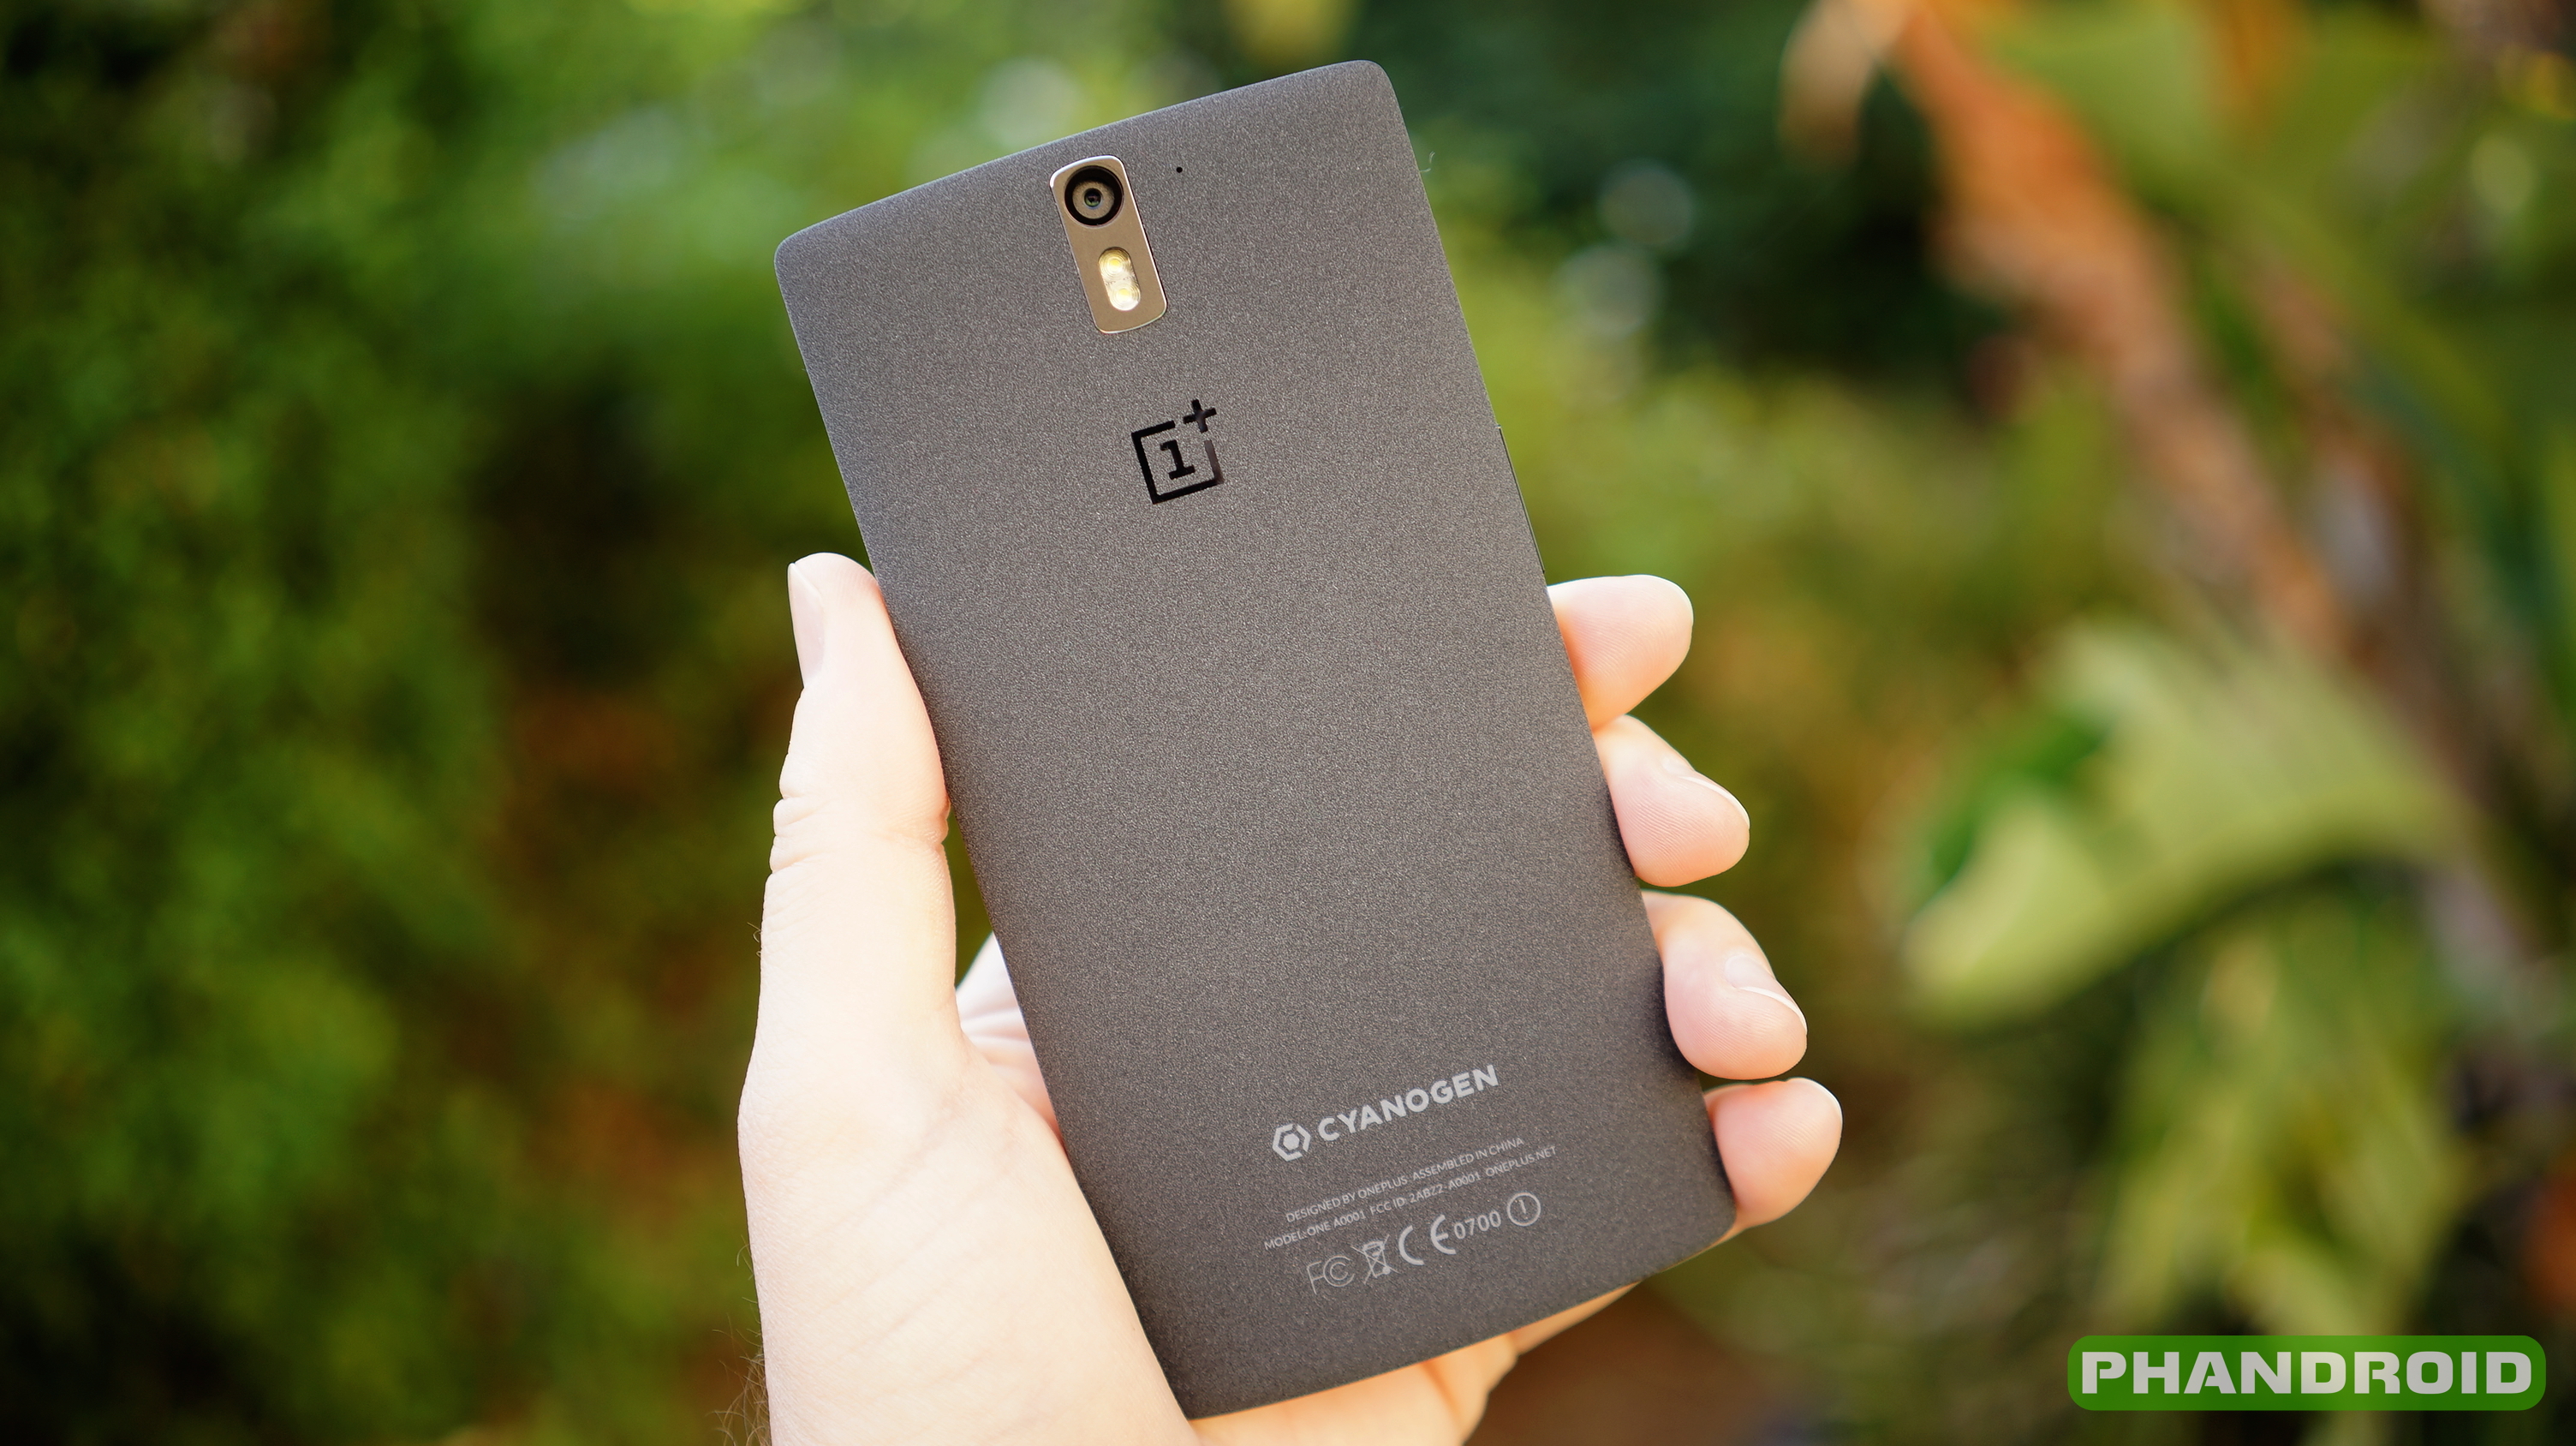 OnePlus One sold over 1.5 million units in its first year - Phandroid